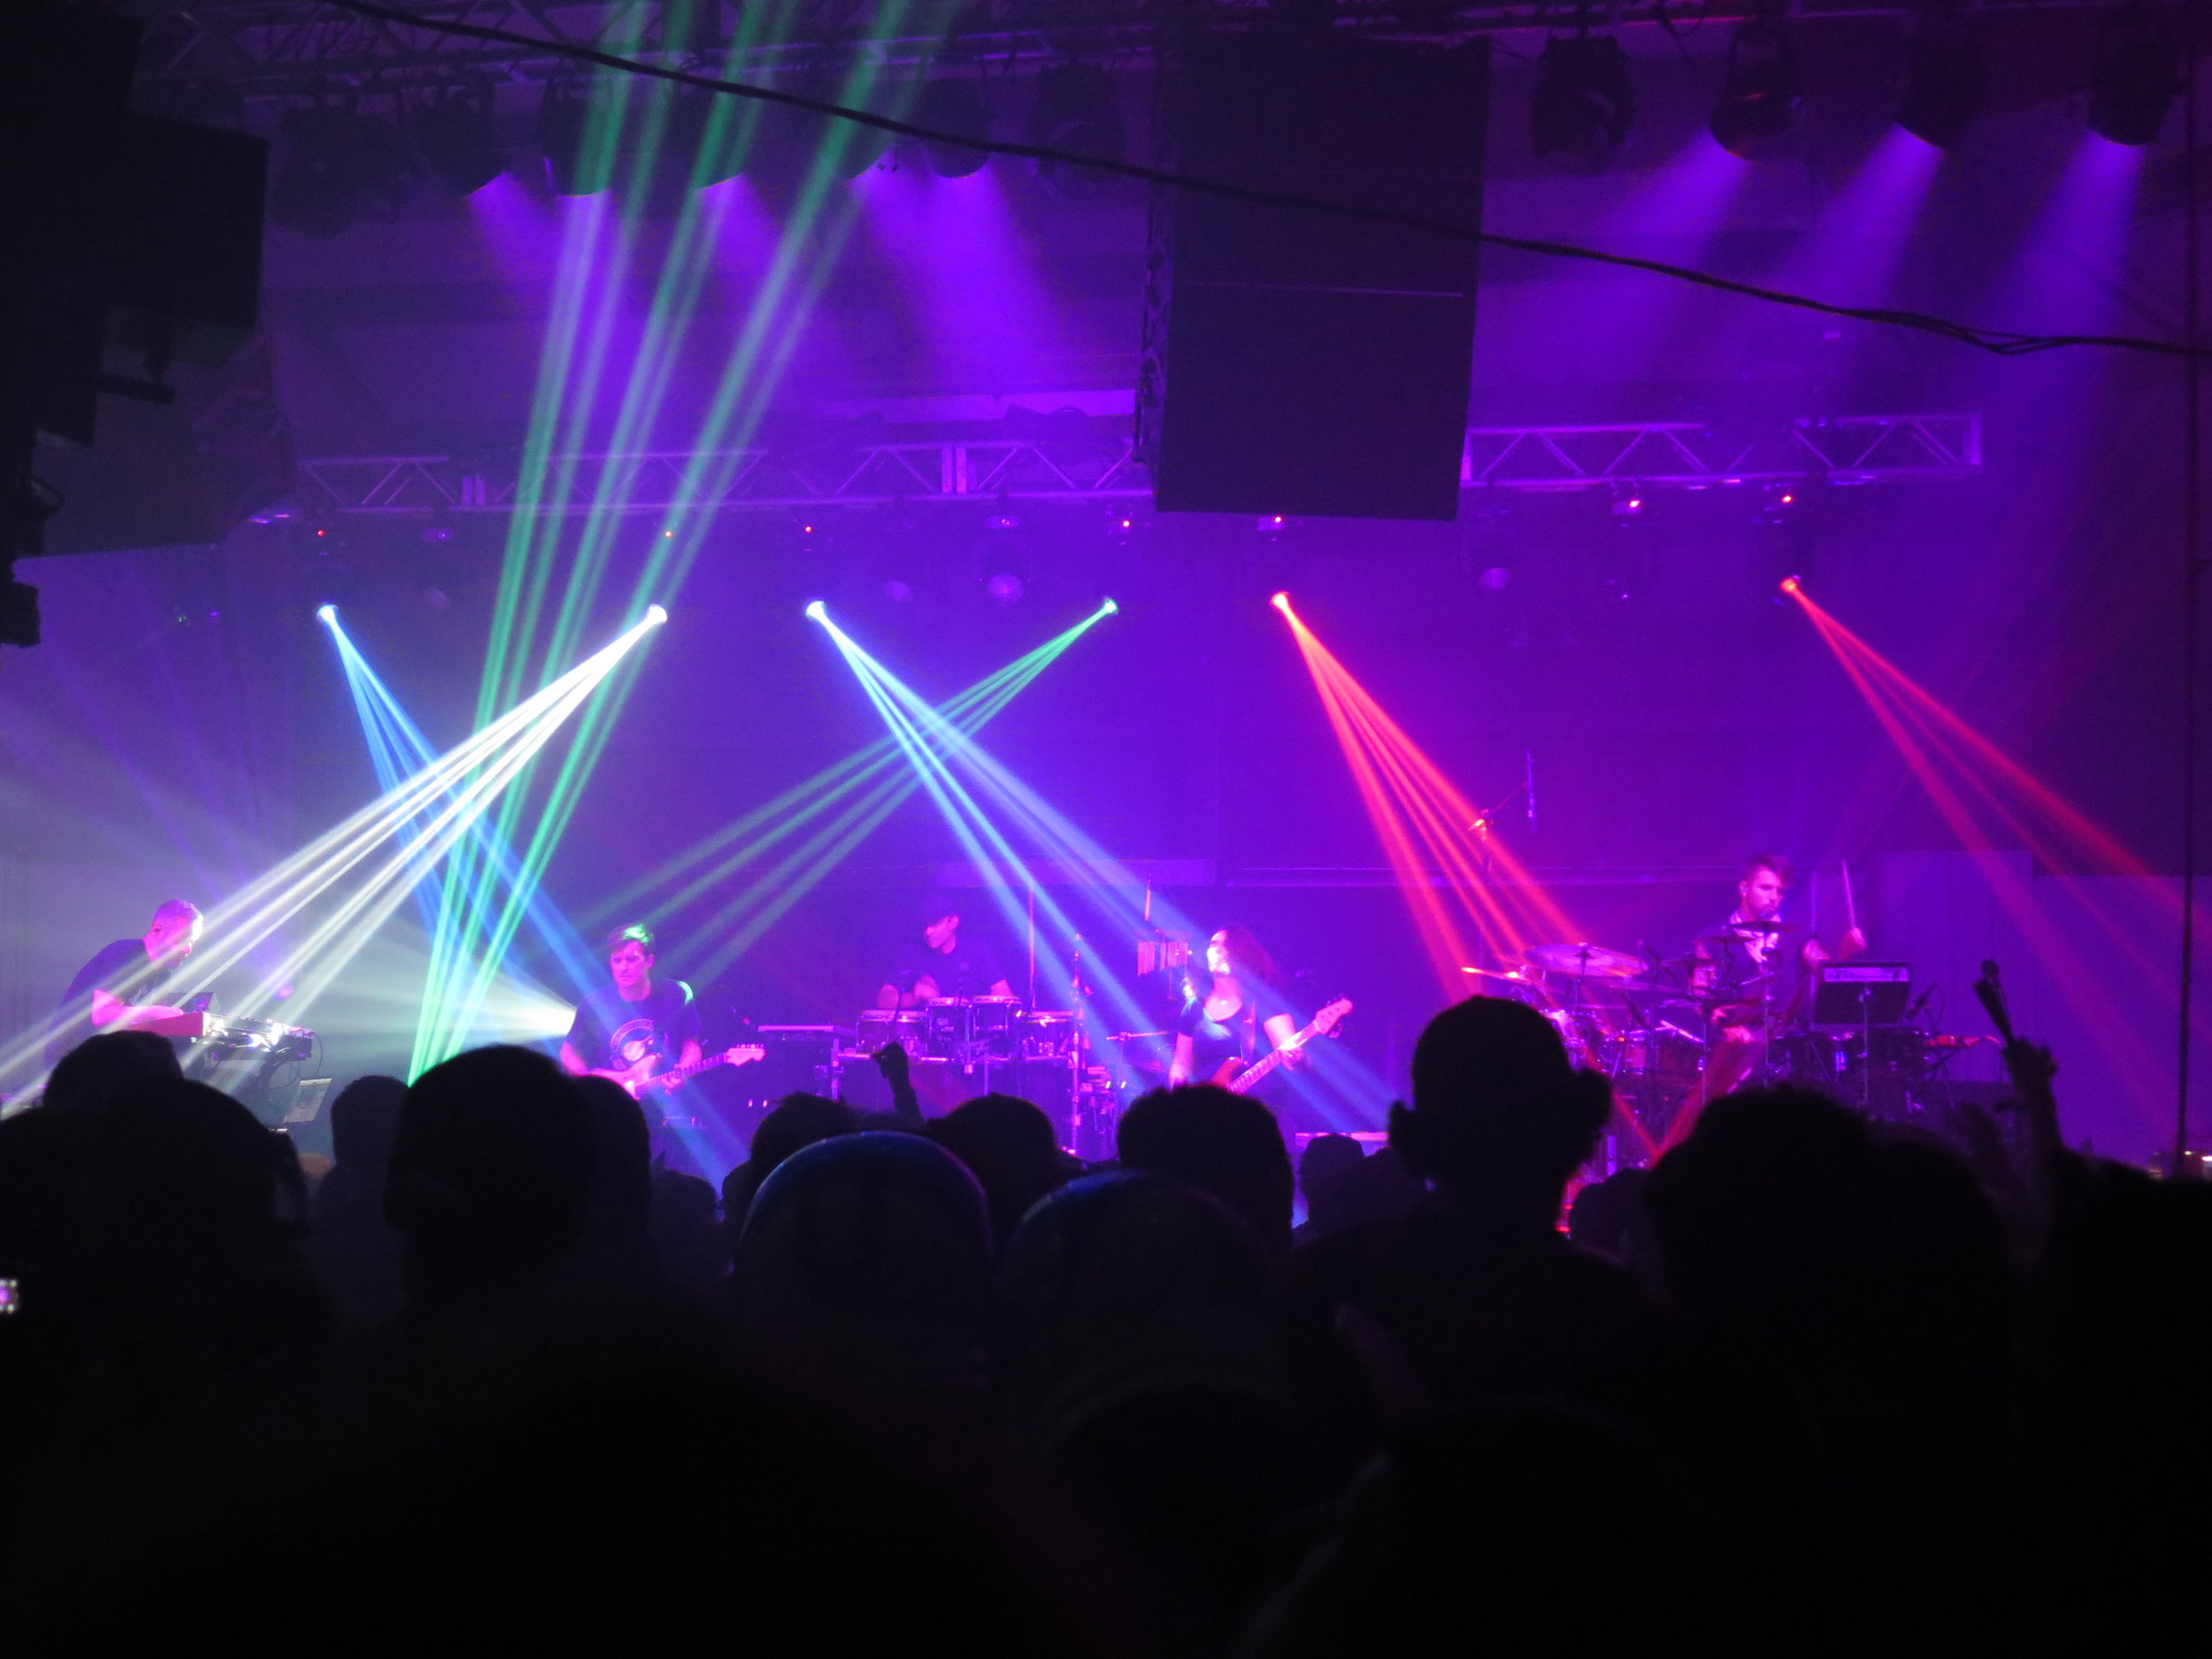 STS9 in the Red Barn